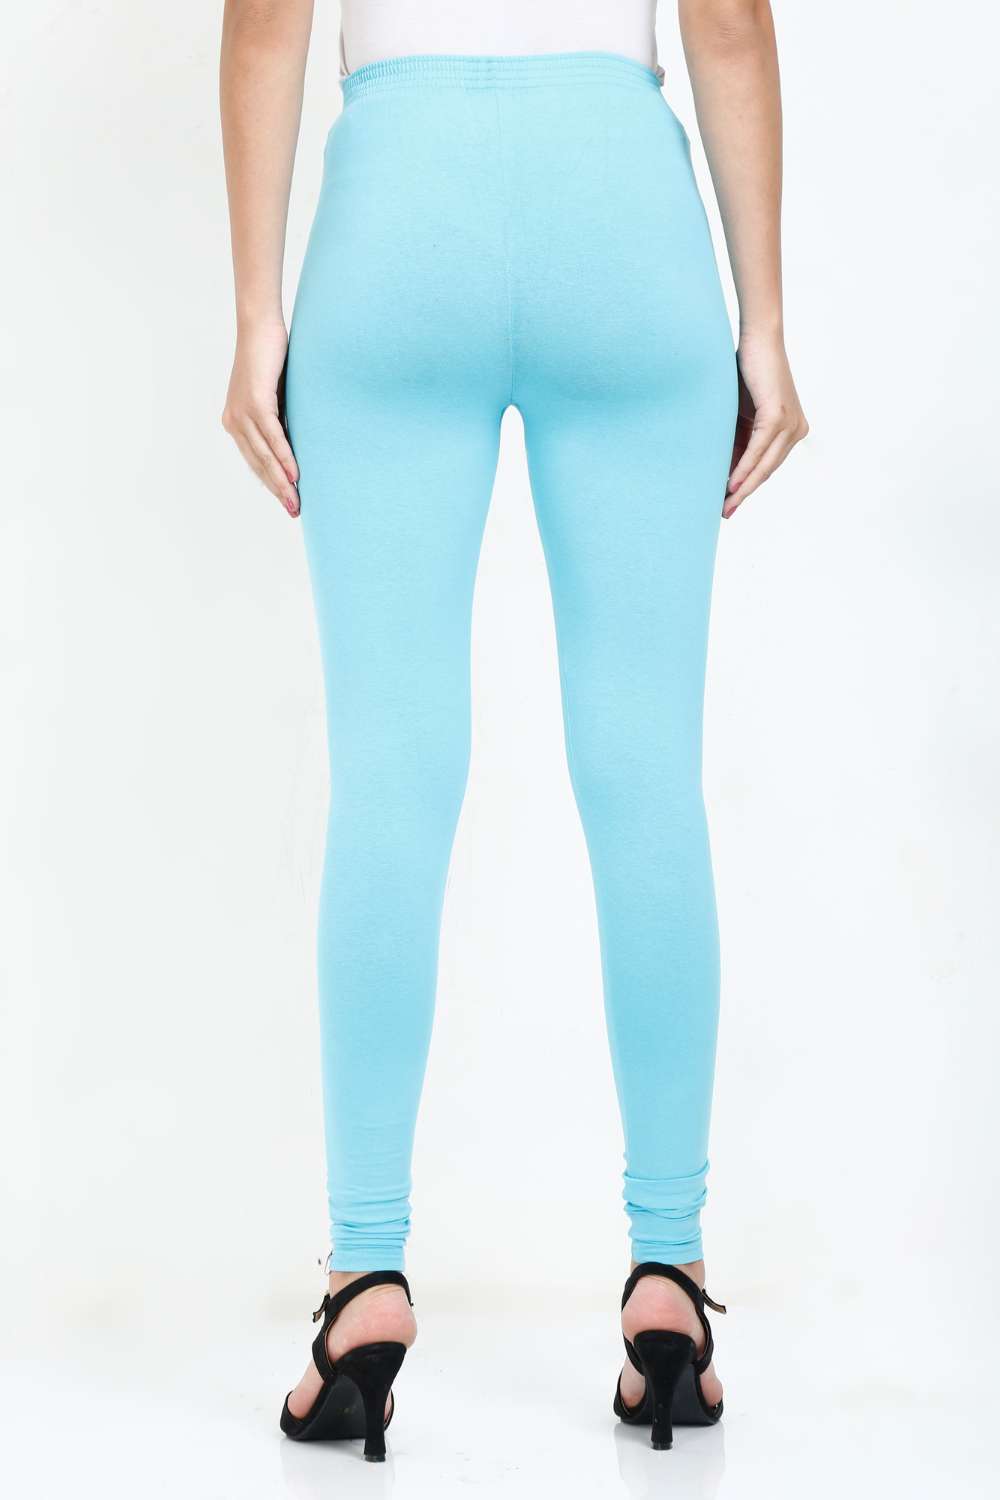 Sky Blue And Cotton Ladies Legging, Size: Medium And Large at Rs 150 in  Delhi